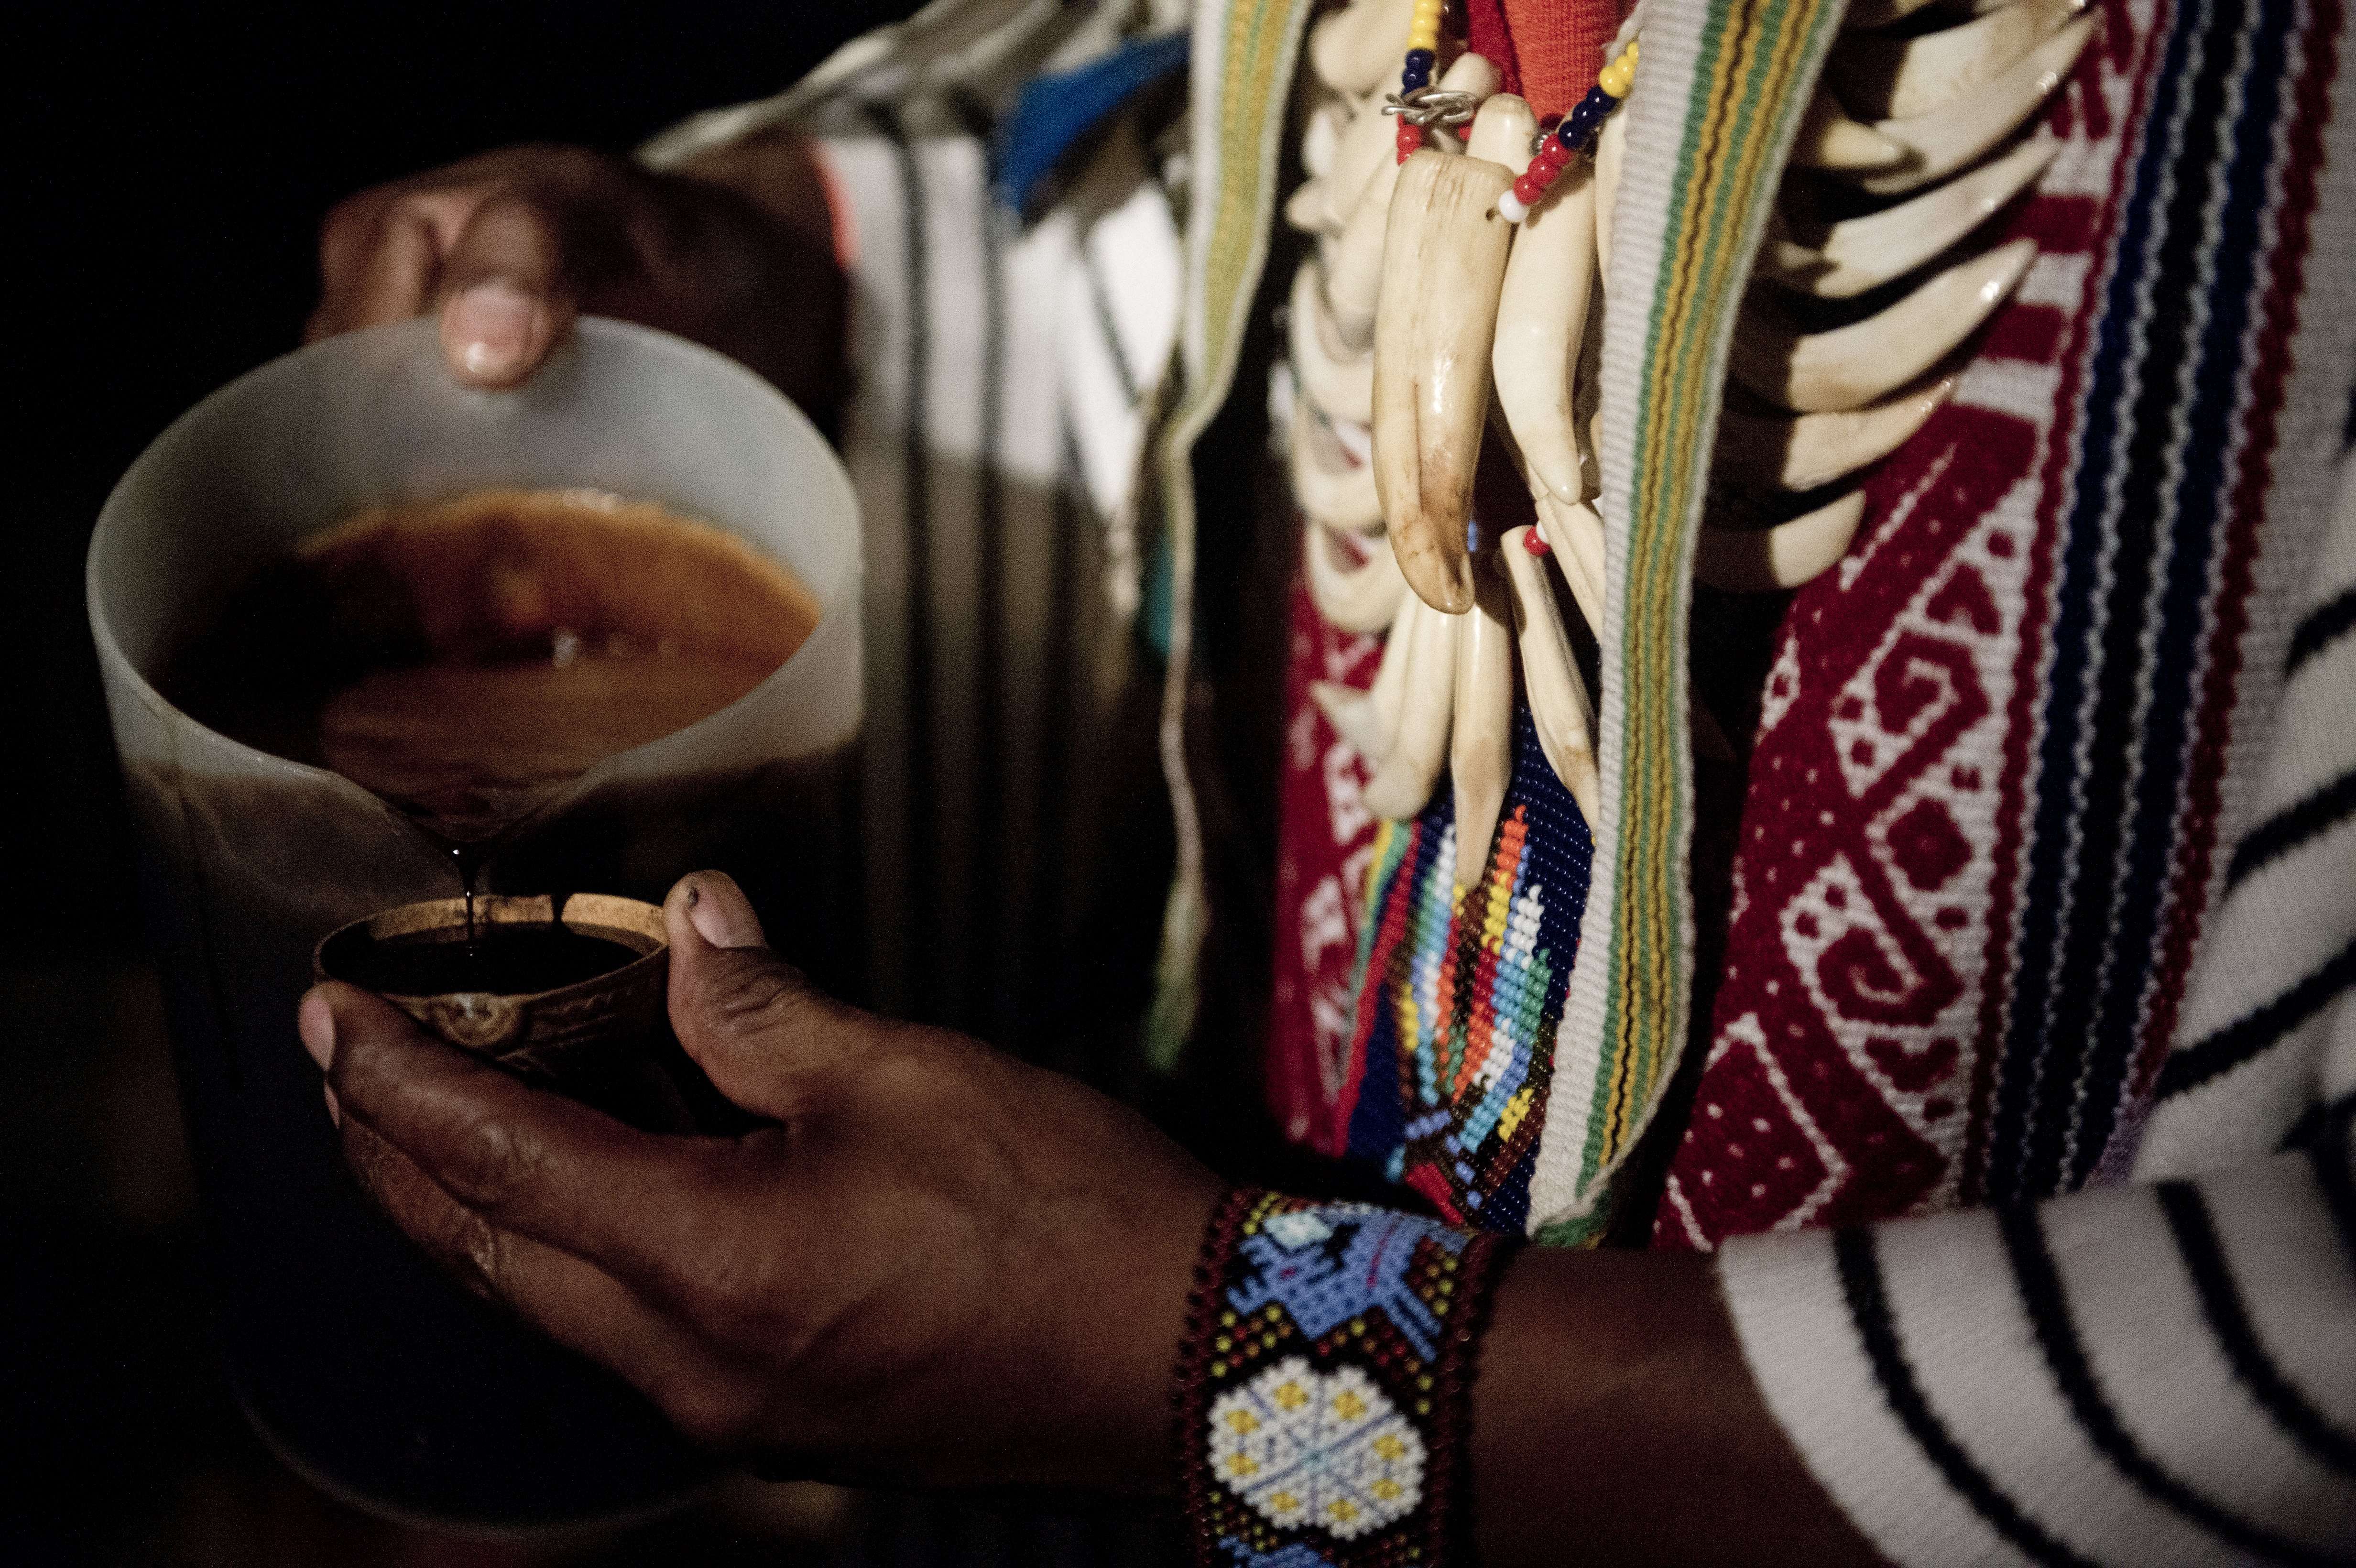 A healer starts a Yage ceremony in La Calera, Colombia. Yage, a mixture of the Ayahuasca hallucinogenic liana and a psychoactive bush, attracts many people in Colombia, who seek to participate in a traditional indigenous ritual of spiritual and physical healing